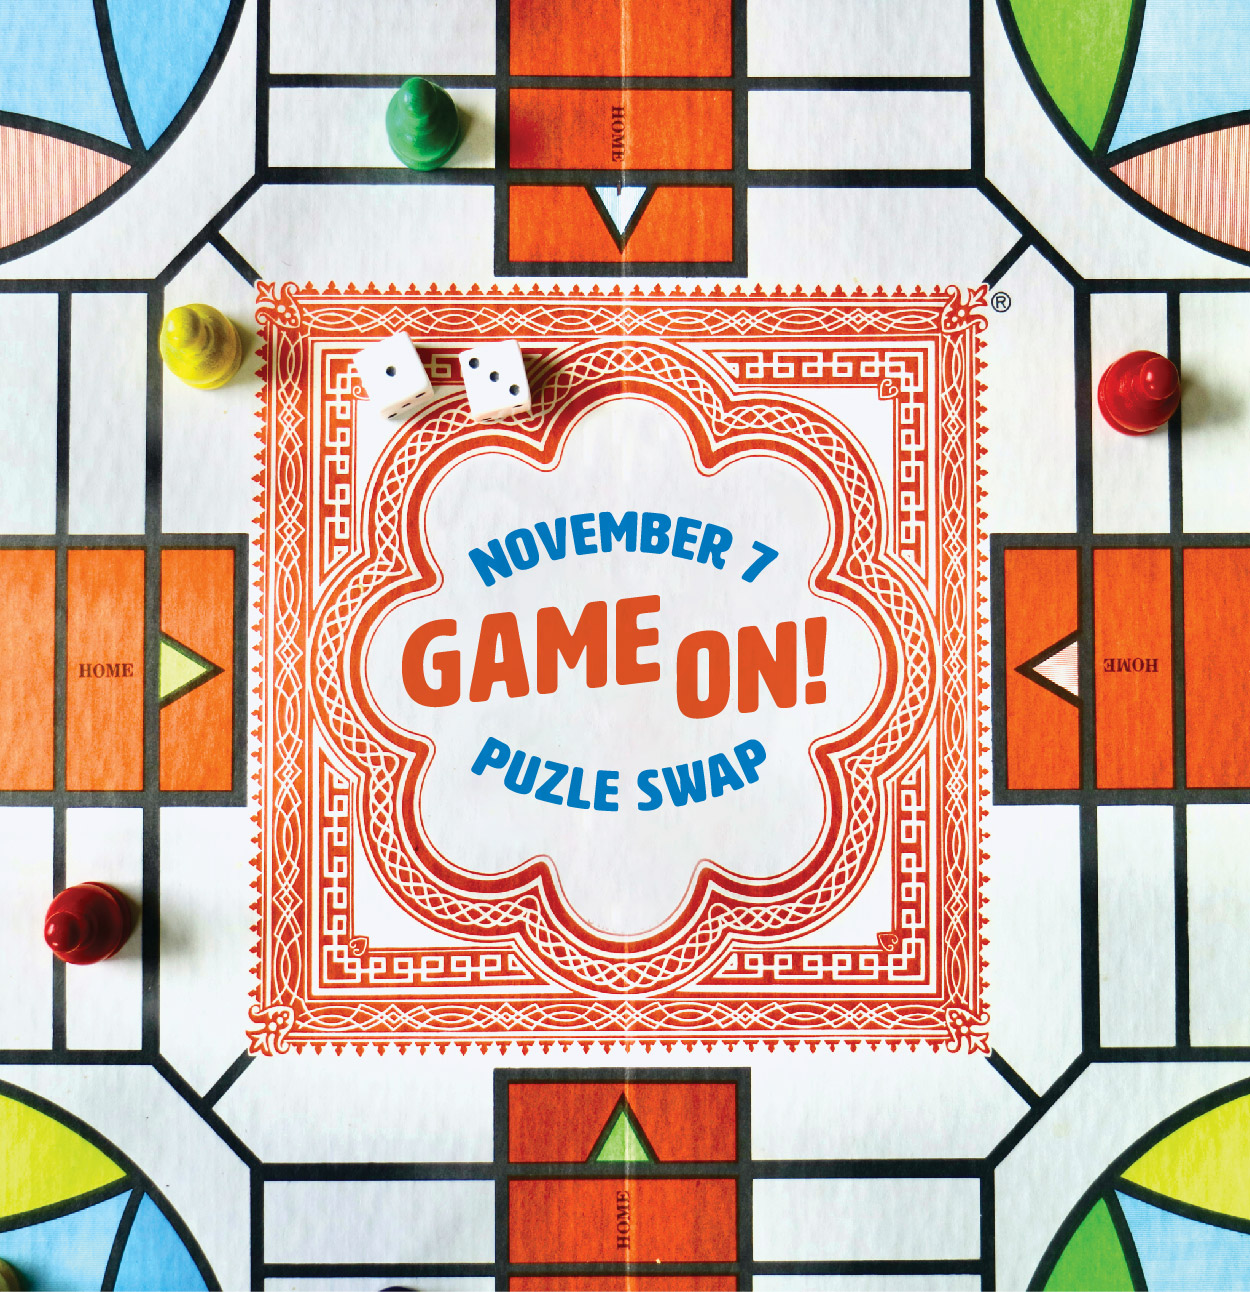 November 7 Game On! Puzzle Swap